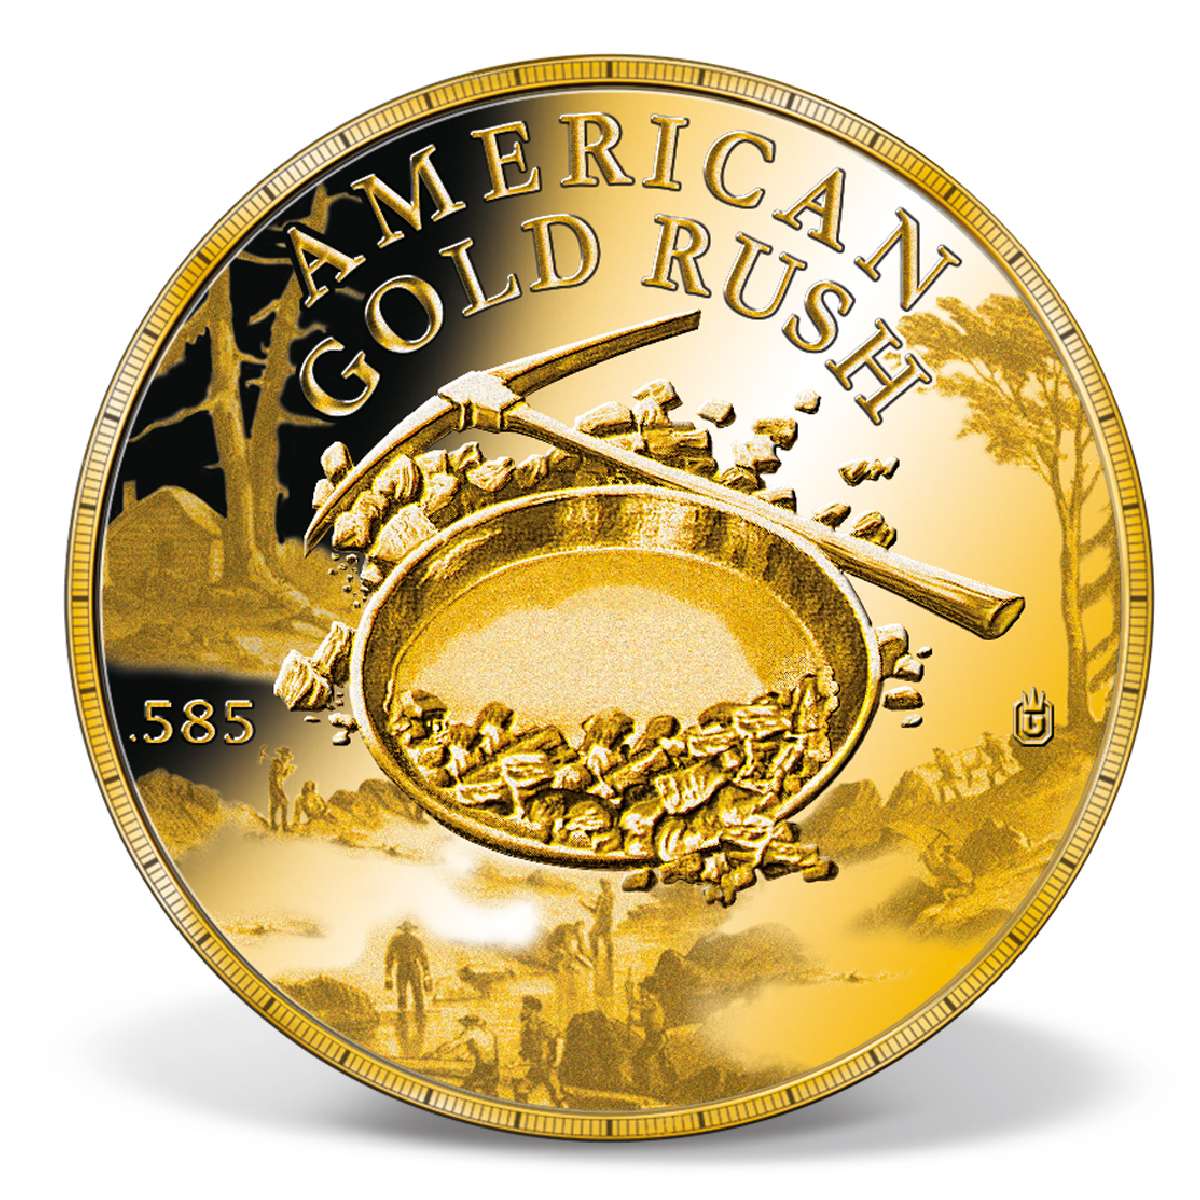 California Gold Rush Commemorative Gold Coin Solid Gold Gold